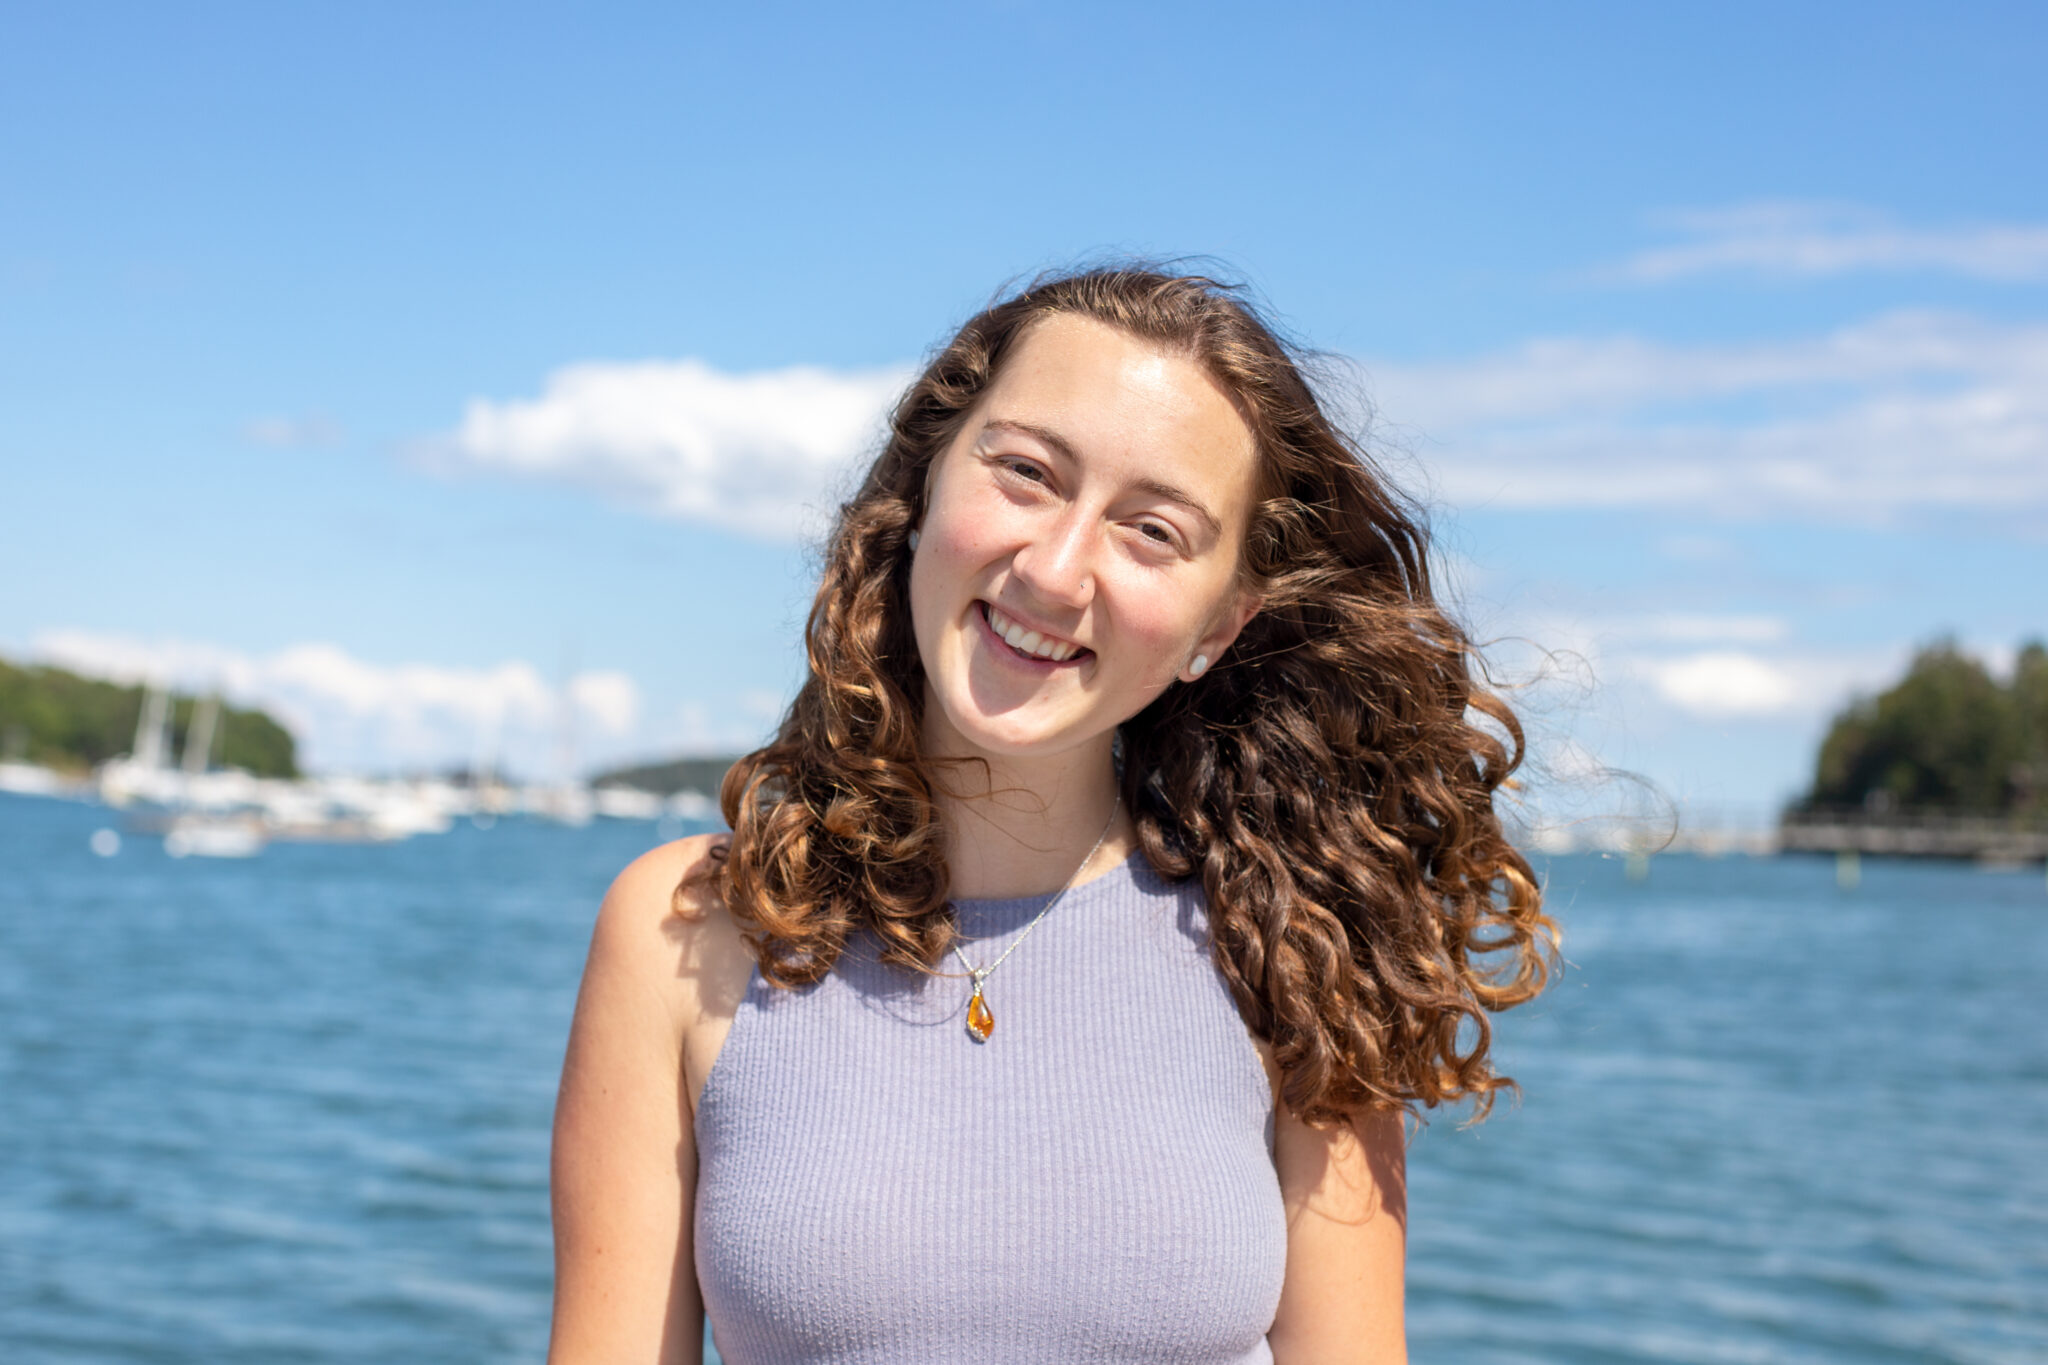 Headshot of Brianna Cunliffe, smiling at the camera with the ocean in background under a bright sky.